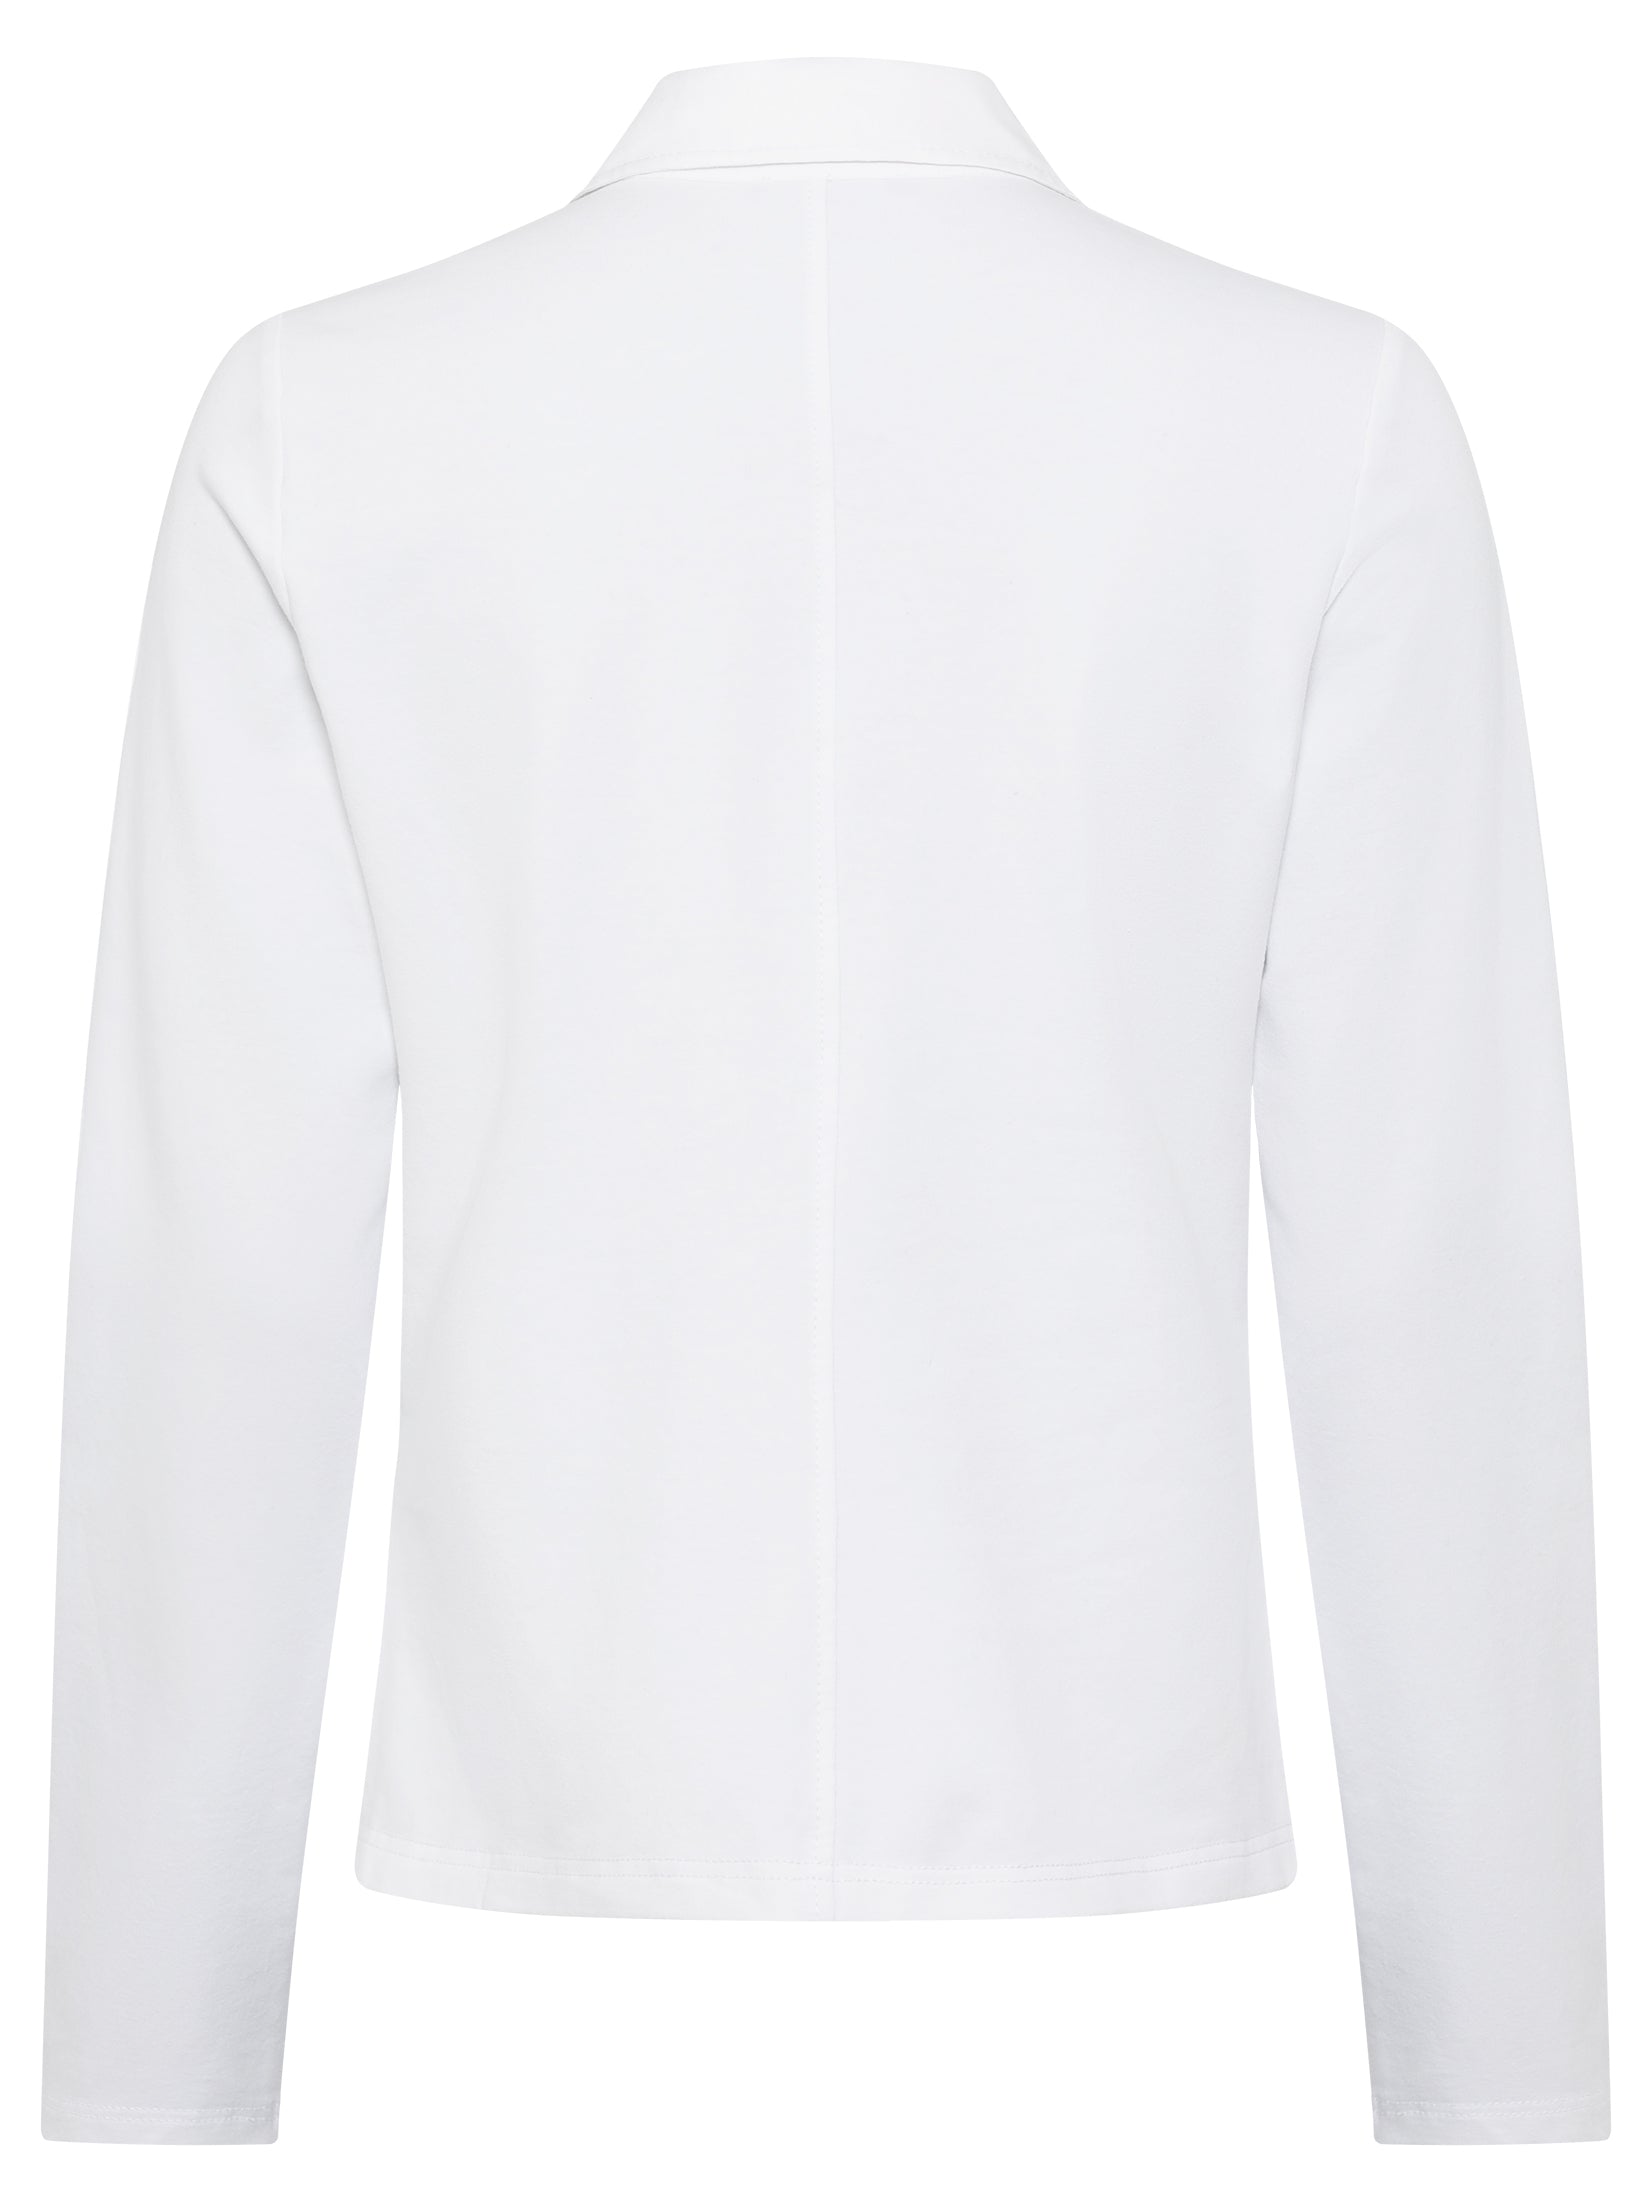 Outdoor Jersey Jacket in White